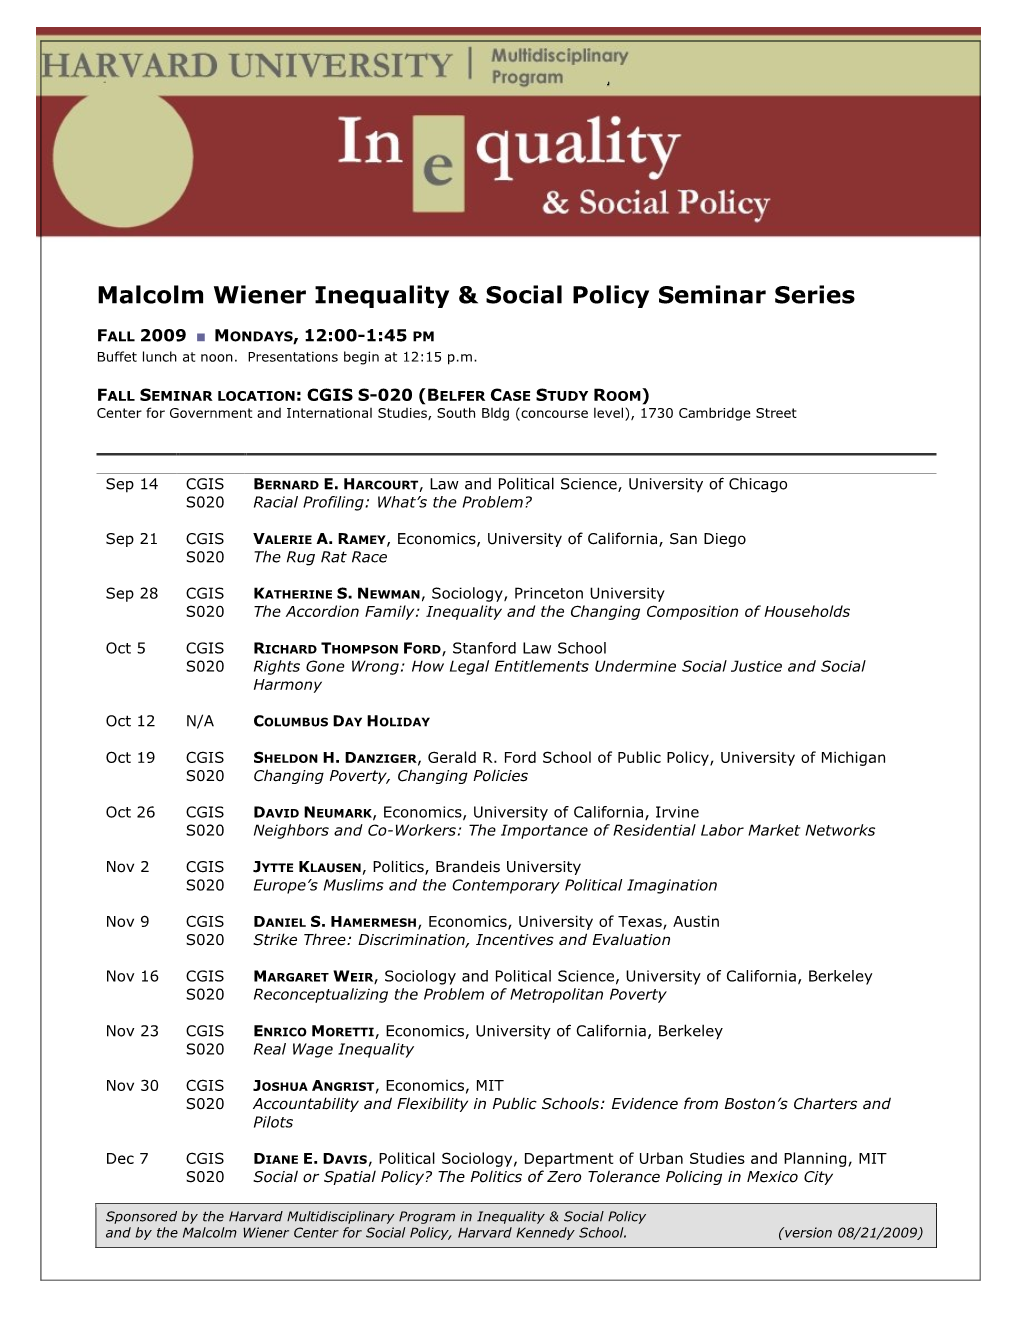 Malcolm Wiener Inequality & Social Policy Seminar Series